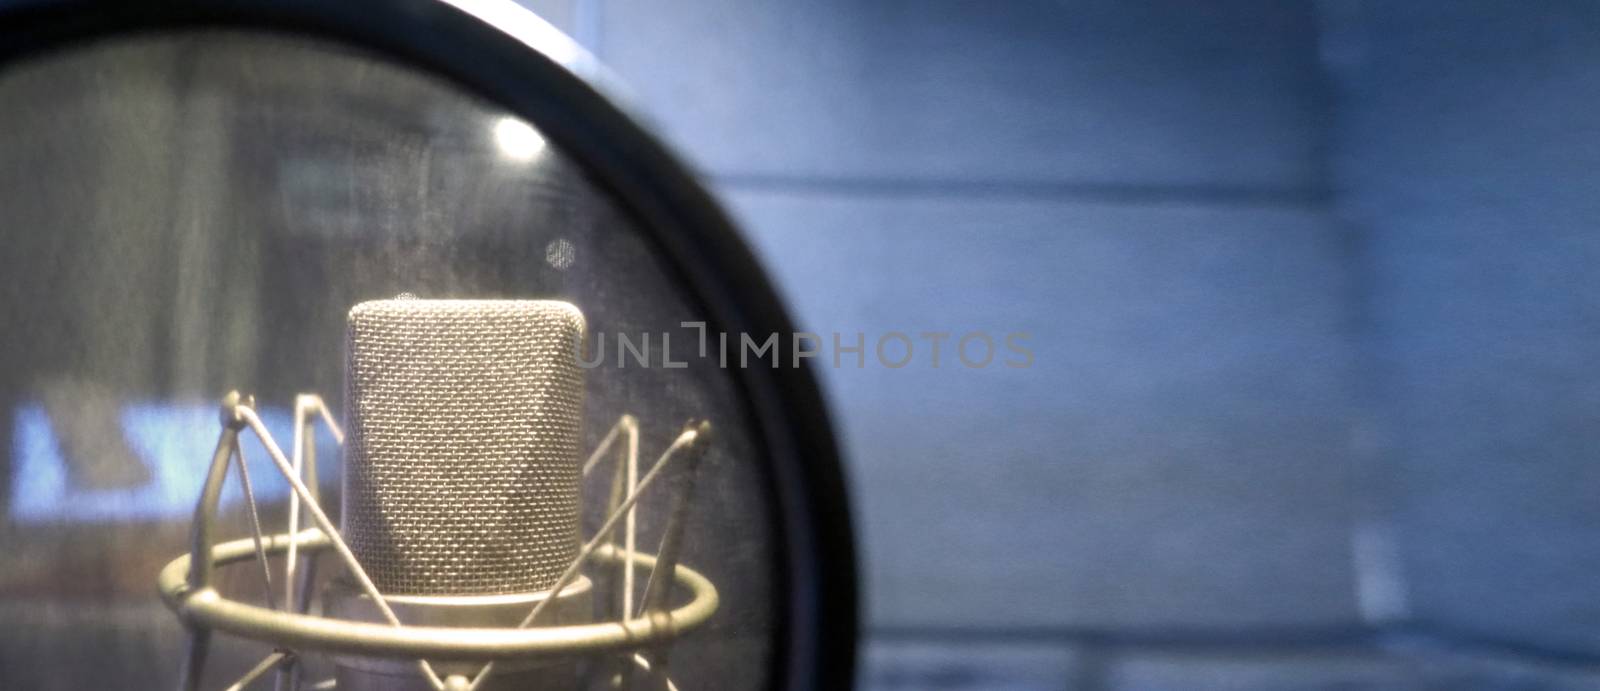 Studio microphone with shock mount and pop filter  by gnepphoto